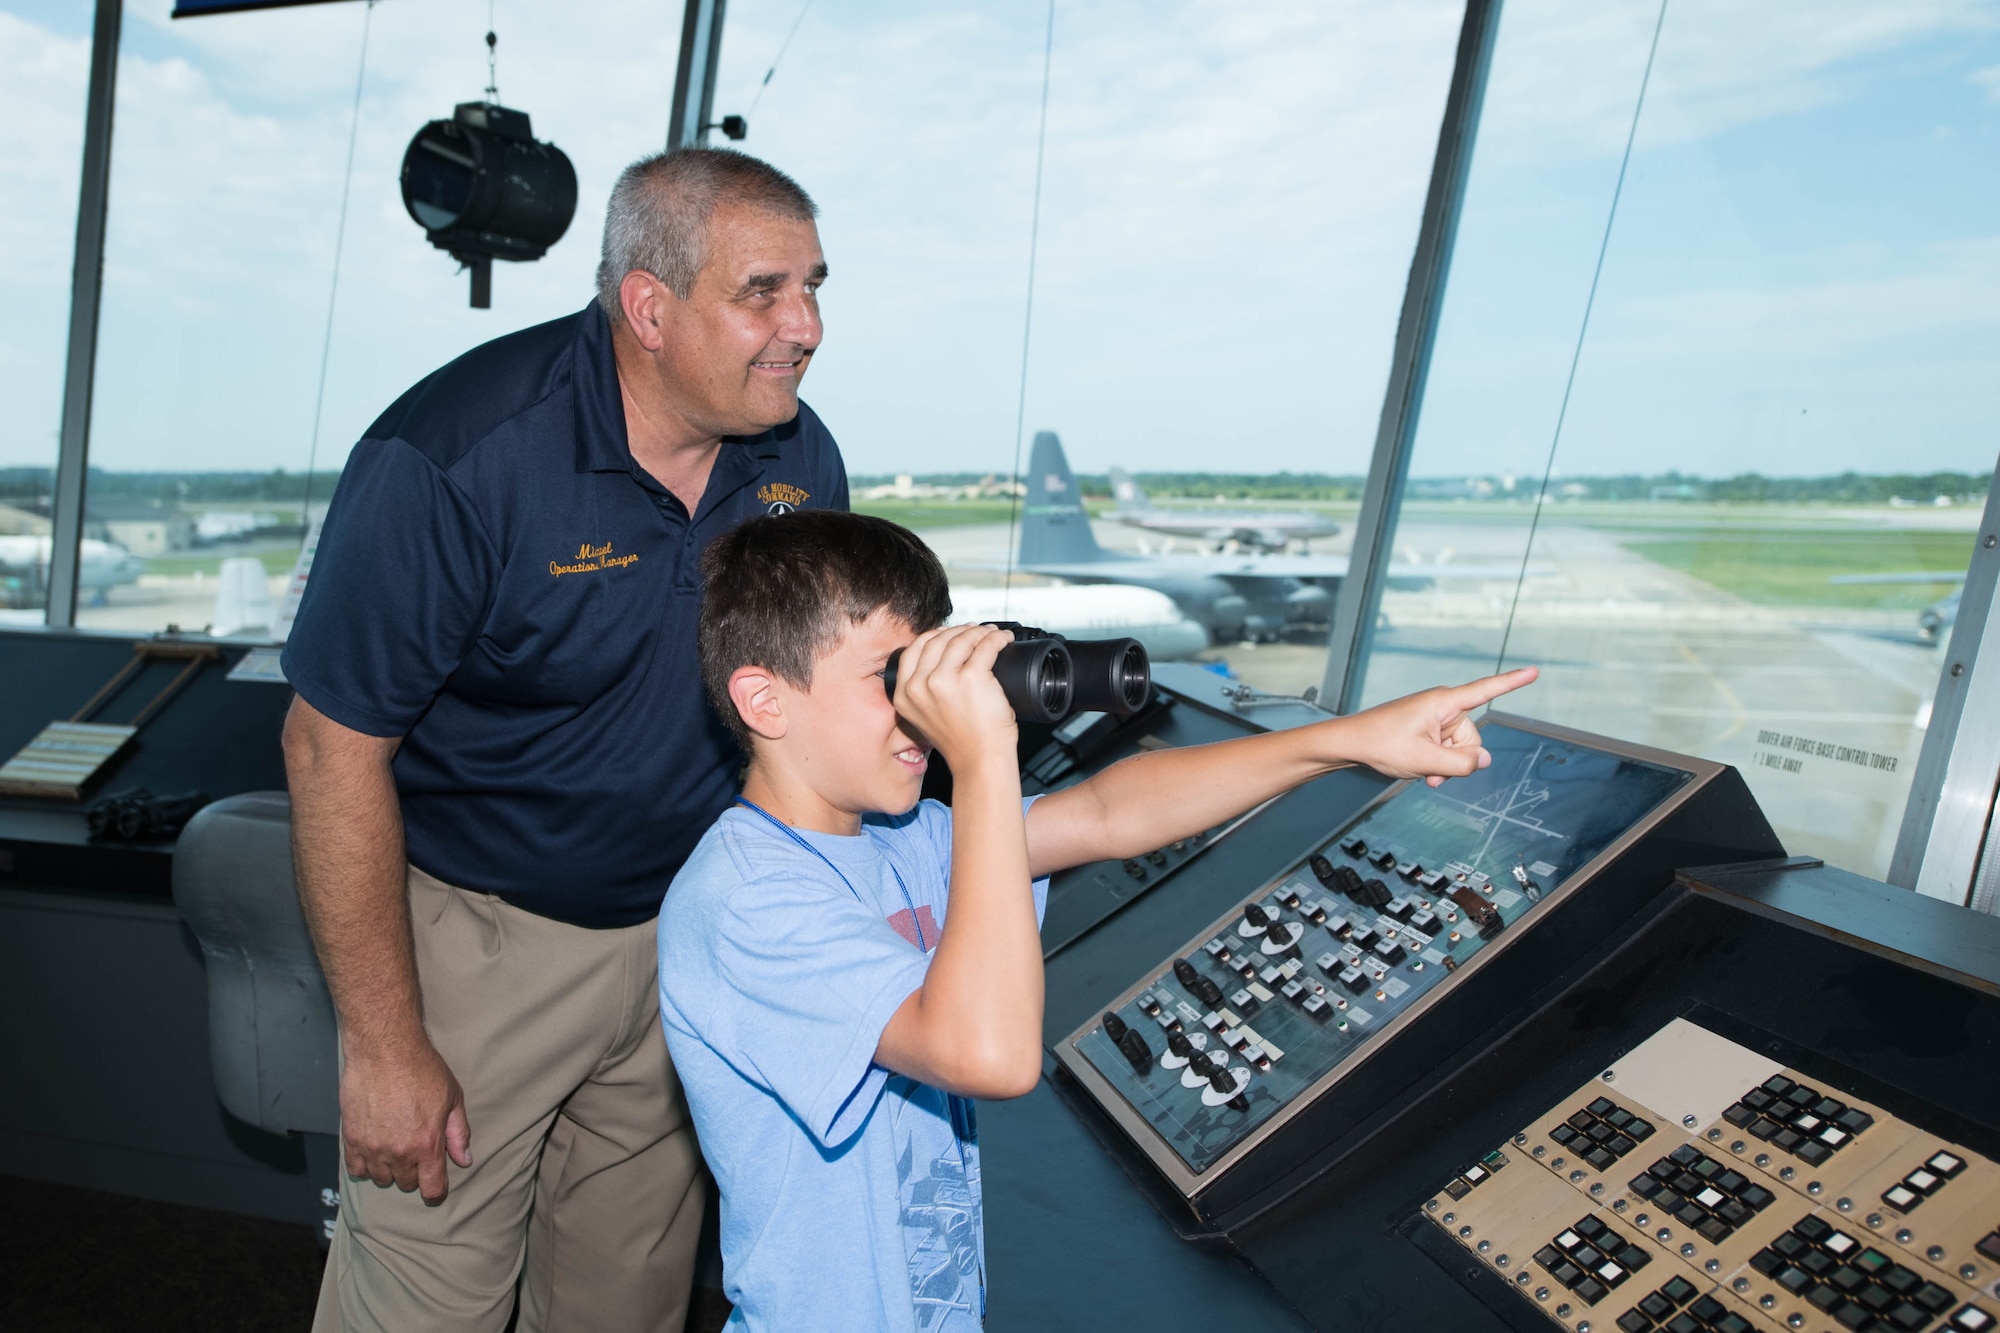 Michael Hurlburt, Air Mobility Command Museum operations manager, and Alex McKenzie watch a Cessna 172 take off during a 2021 Aviation Summer Camp at the AMC Museum in Dover, Delaware, July 1, 2021. During the camp, kids toured the AMC Museum and parts of Dover Air Force Base, in addition to flying in a Dover AFB Aero Club aircraft. (U.S. Air Force photo by Mauricio Campino)